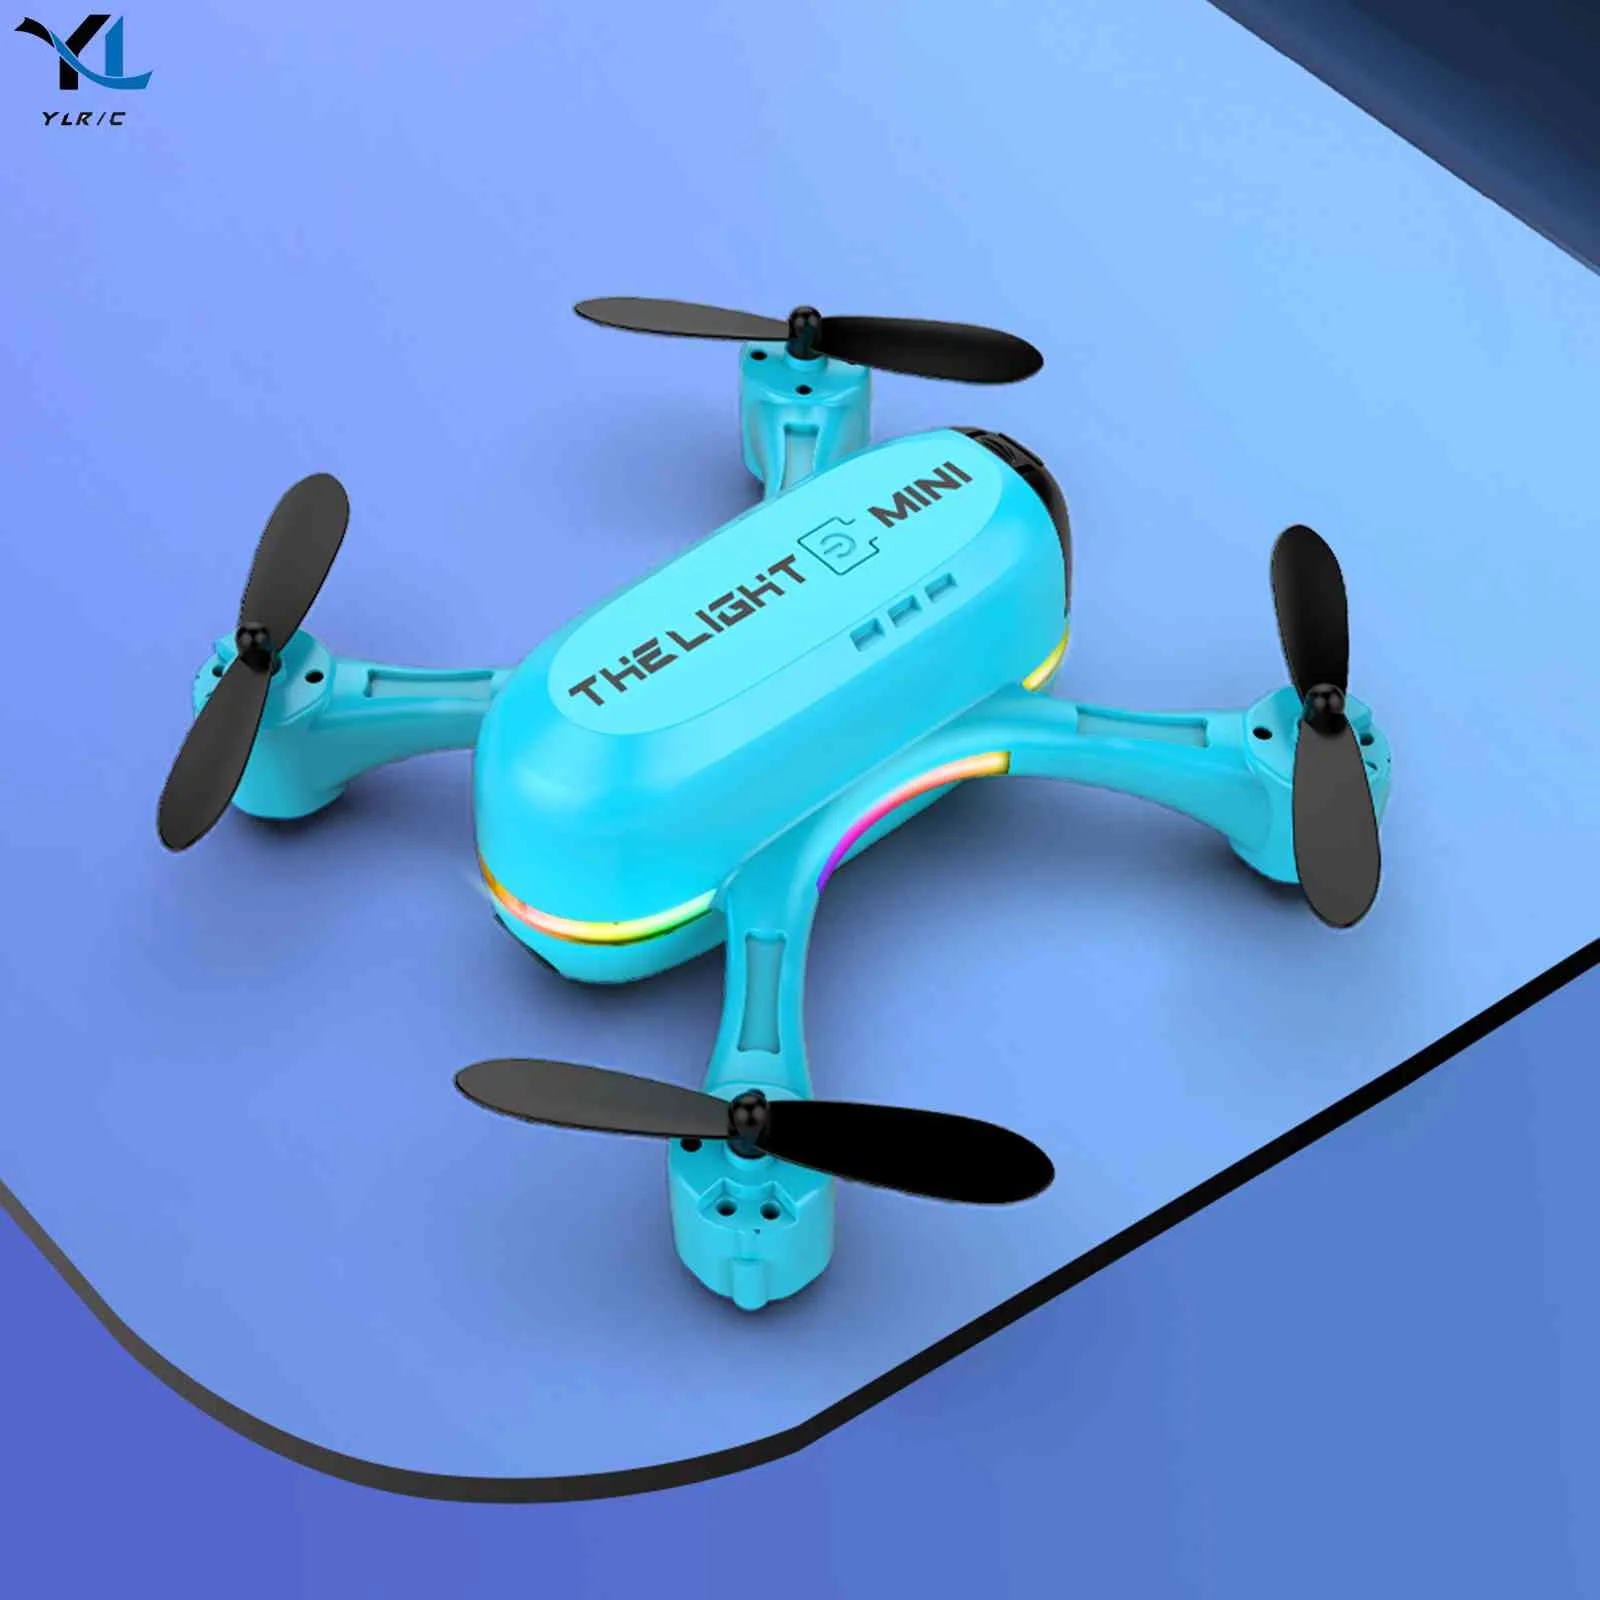 

4K HD Camera FPV Quadcopter Headless Mode 4CH 2.4GHz FPV RC Quadcopter One-key Return Mini RC Drone Altitude Hold with LED Light